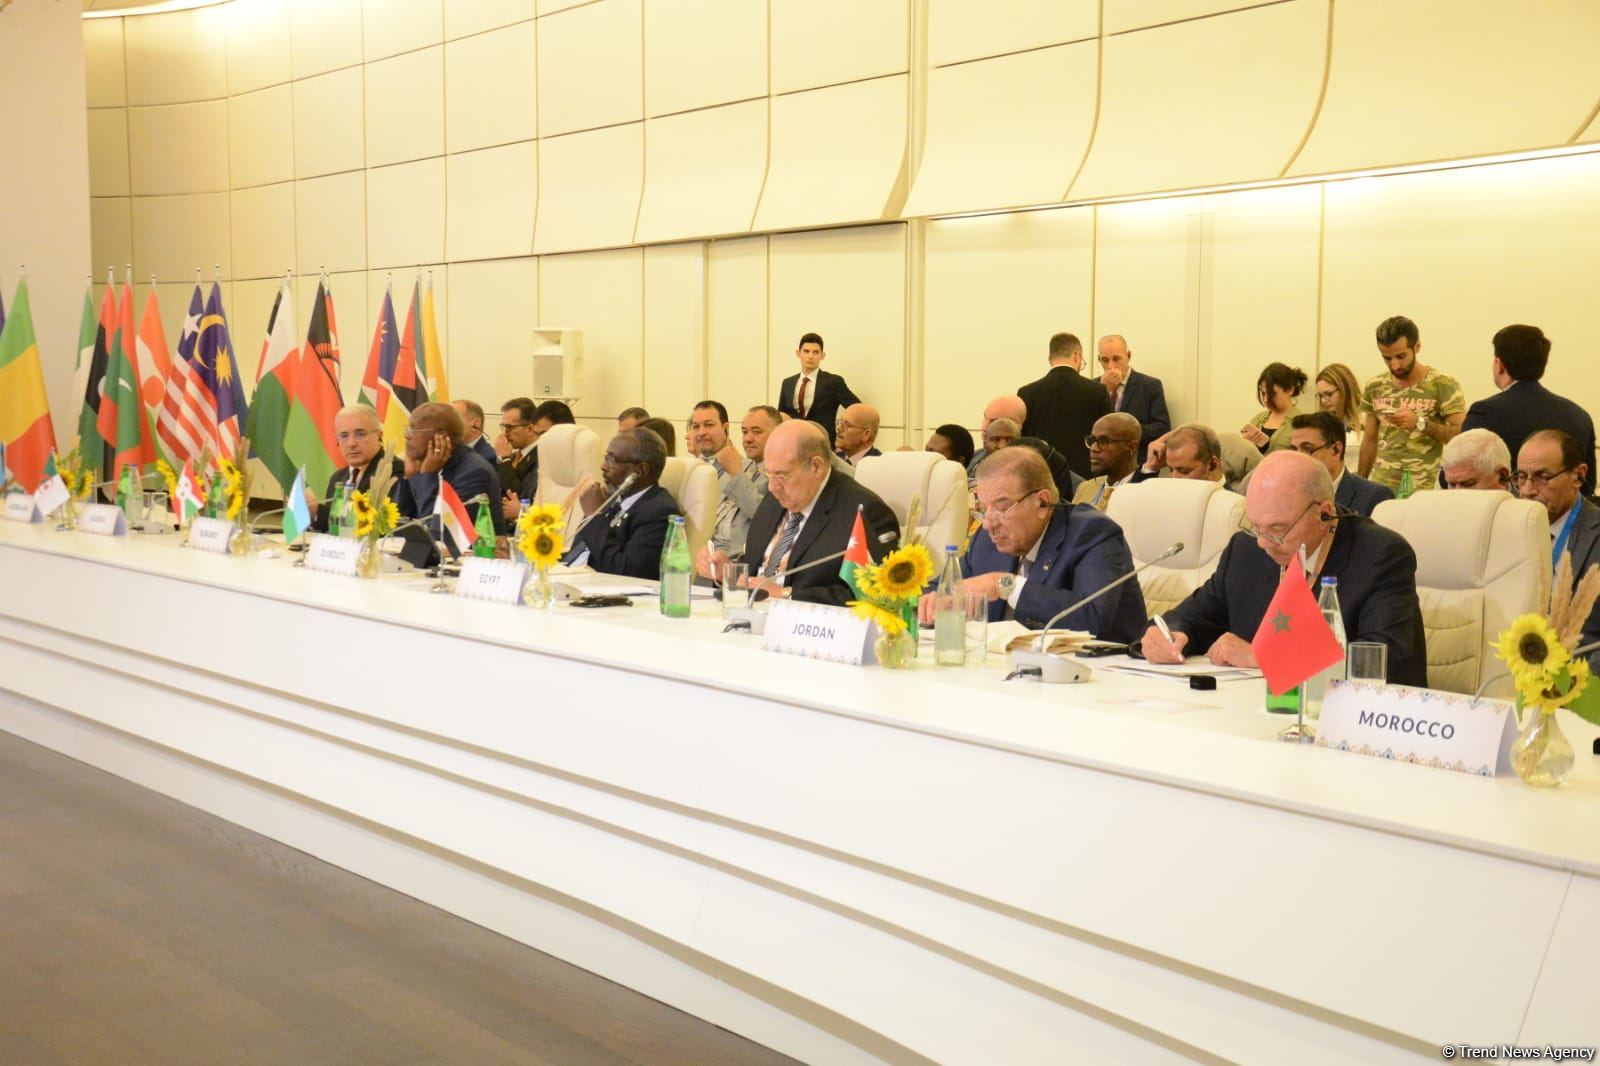 Heads of delegations delivering speeches at Baku Conference of Non-Aligned Movement Parliamentary Network (PHOTO)